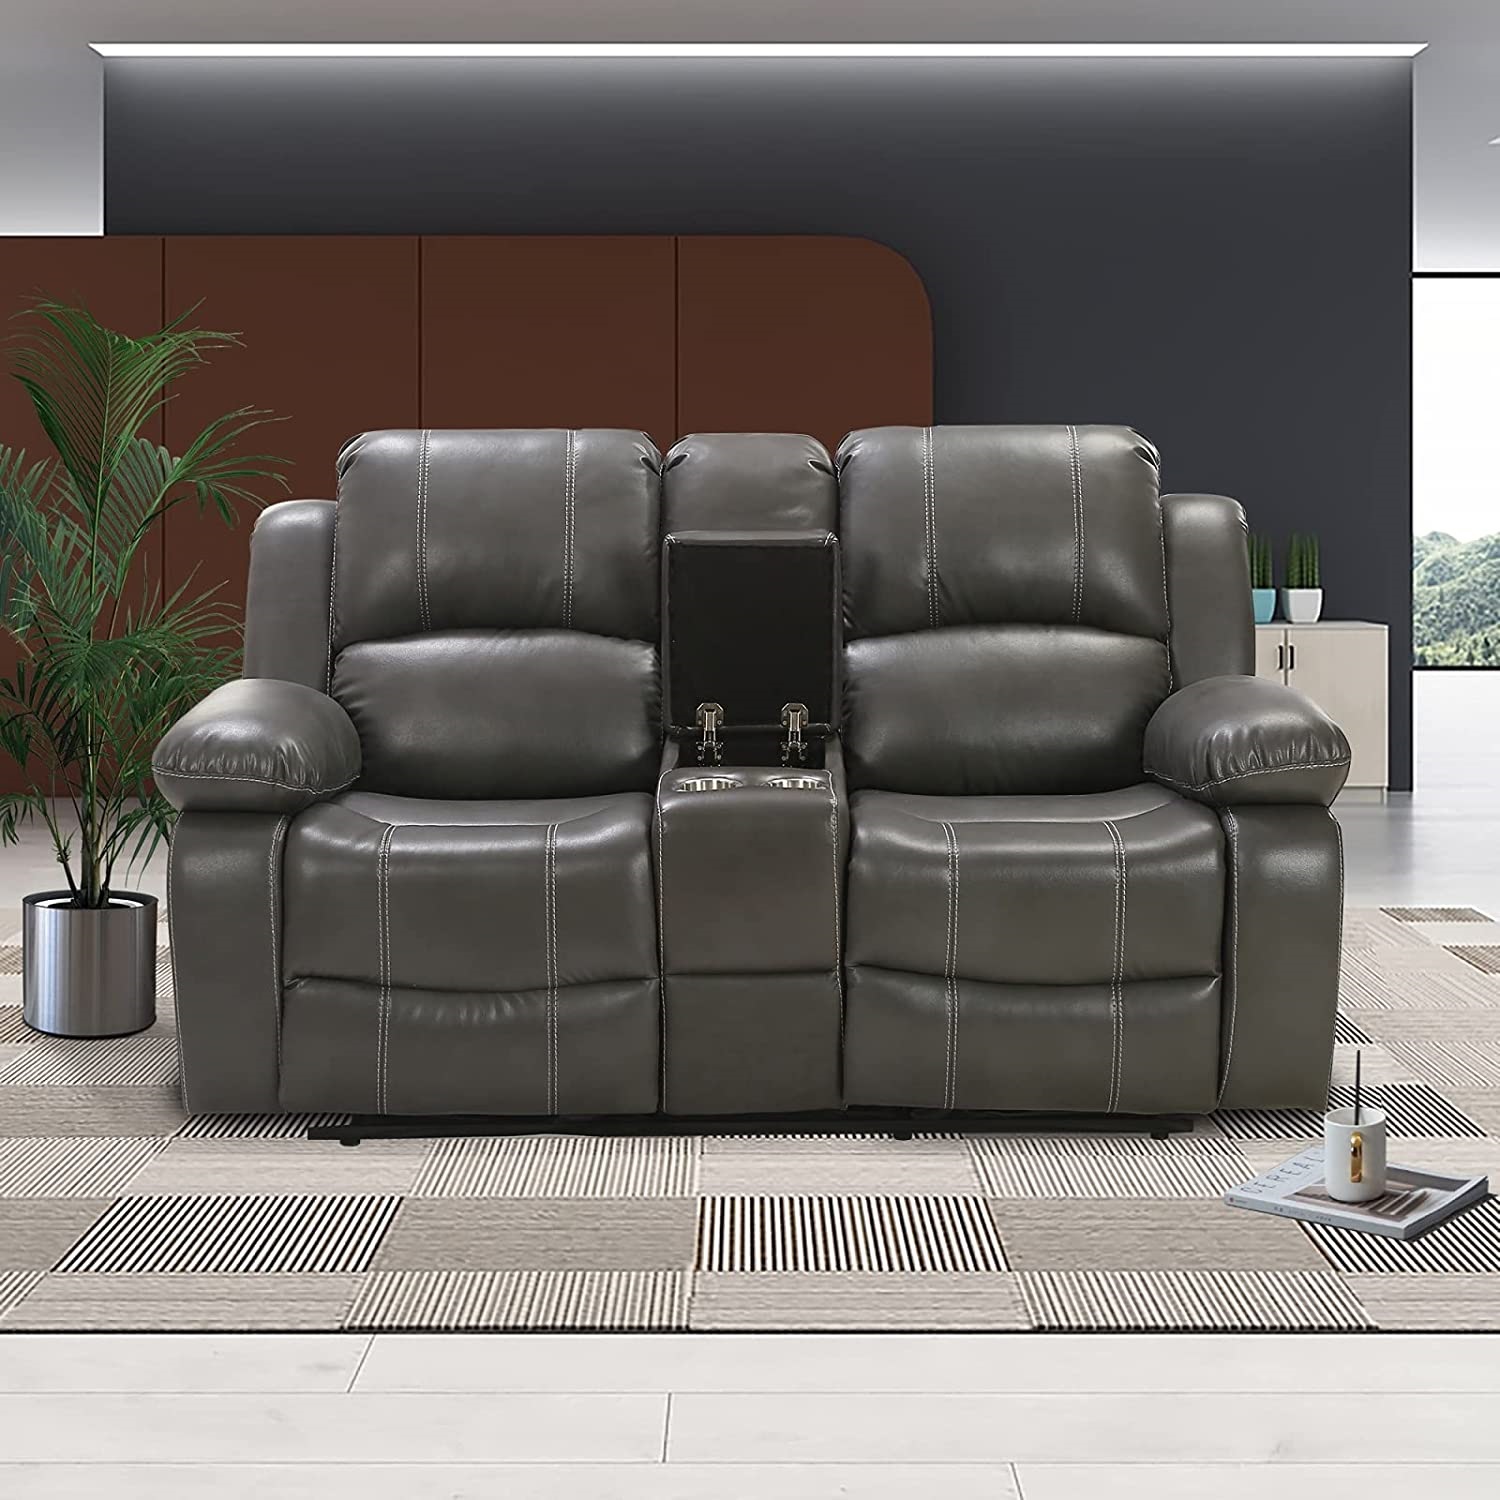 Pannow Double Recliner Loveseat with Console Slate, Double Reclining Sofa with Cup Holder